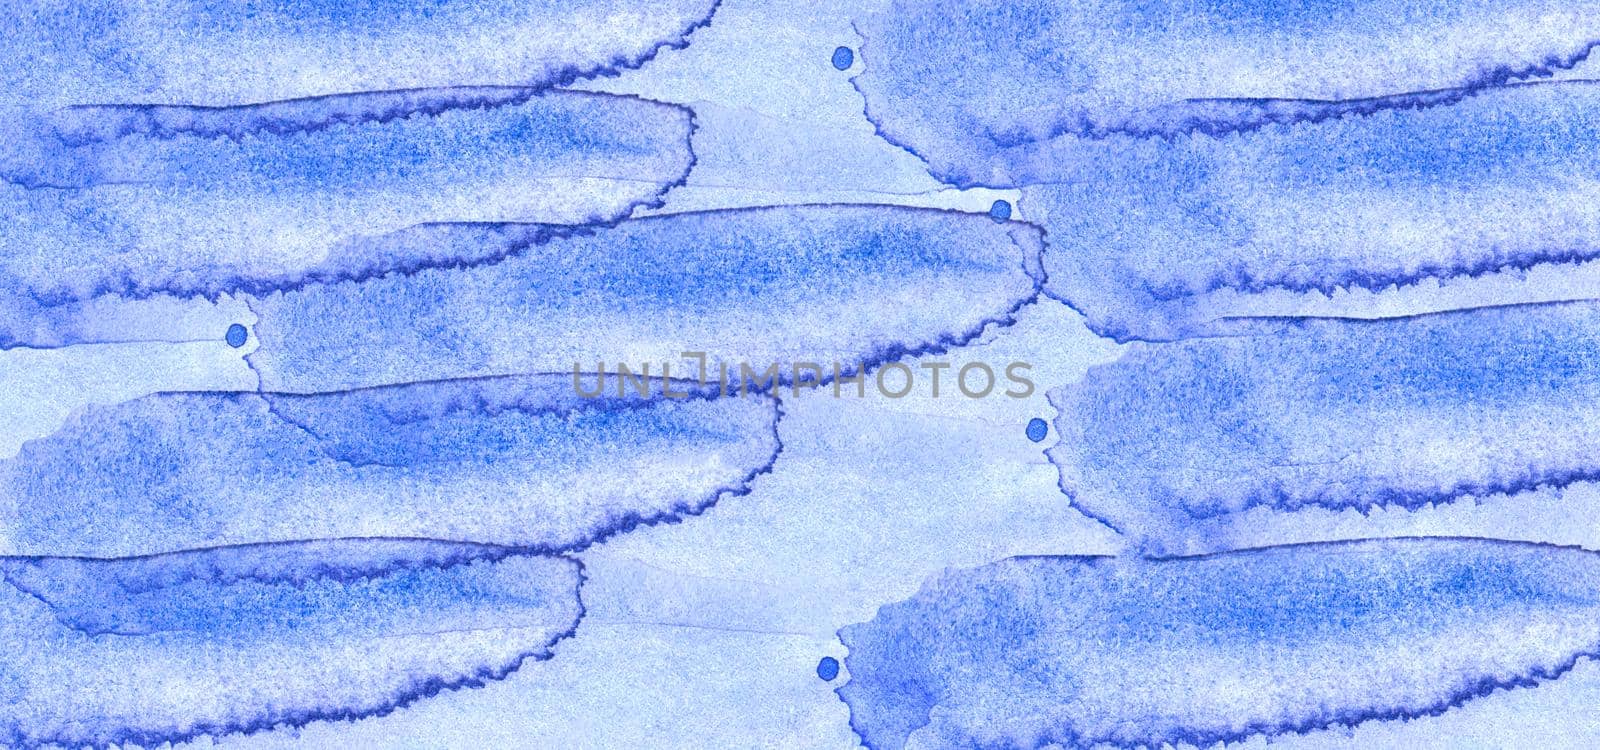 Abstract blue wavy watercolor painting. Decorative design element. by nightlyviolet